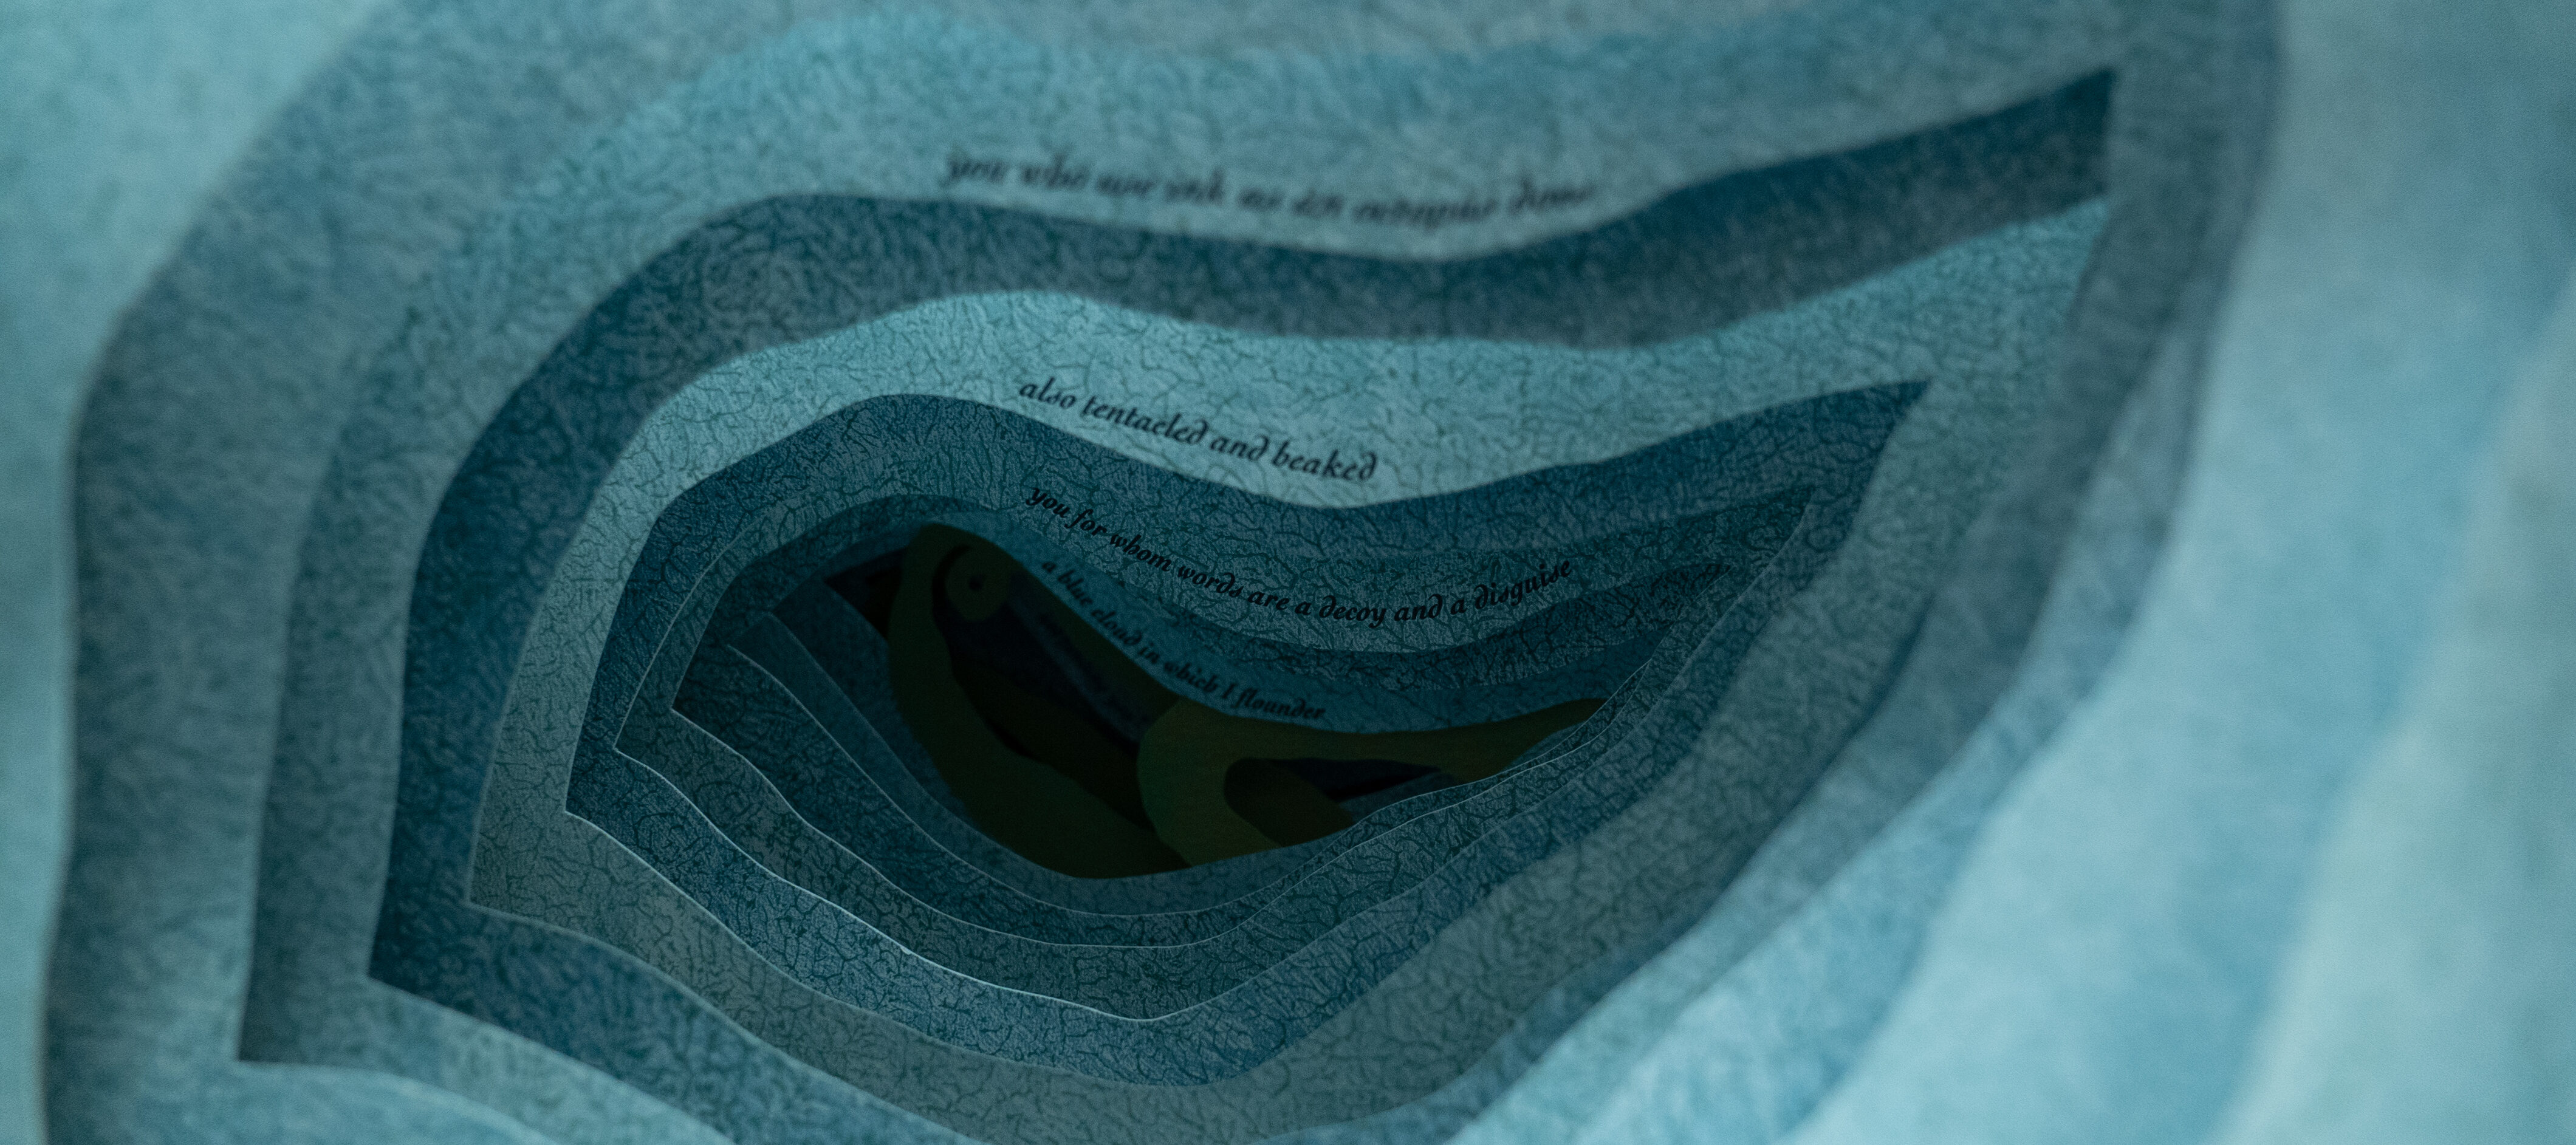 A close up photograph of an artist's book. Each layer of blue paper has an organic, irregular shape cut out of the middle so the layers form a tunnel. A line of text is printed in small type on each page, receding into the tunnel like an underwater cavern.